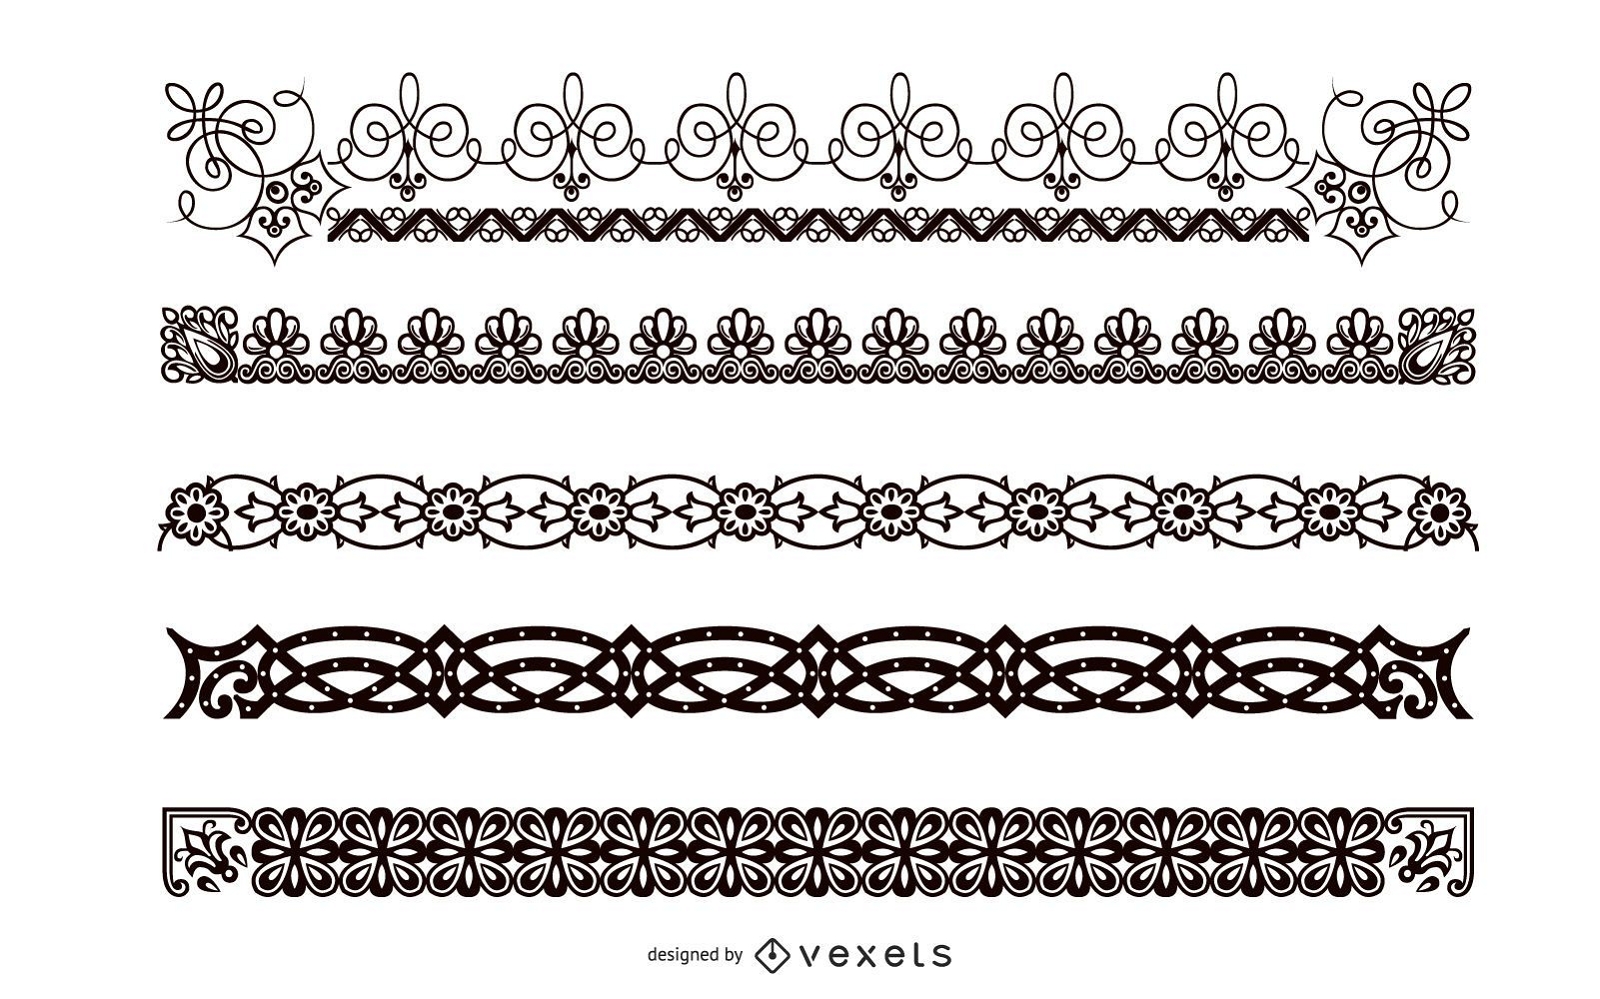 Abstract Black & White Border Set Vector Download